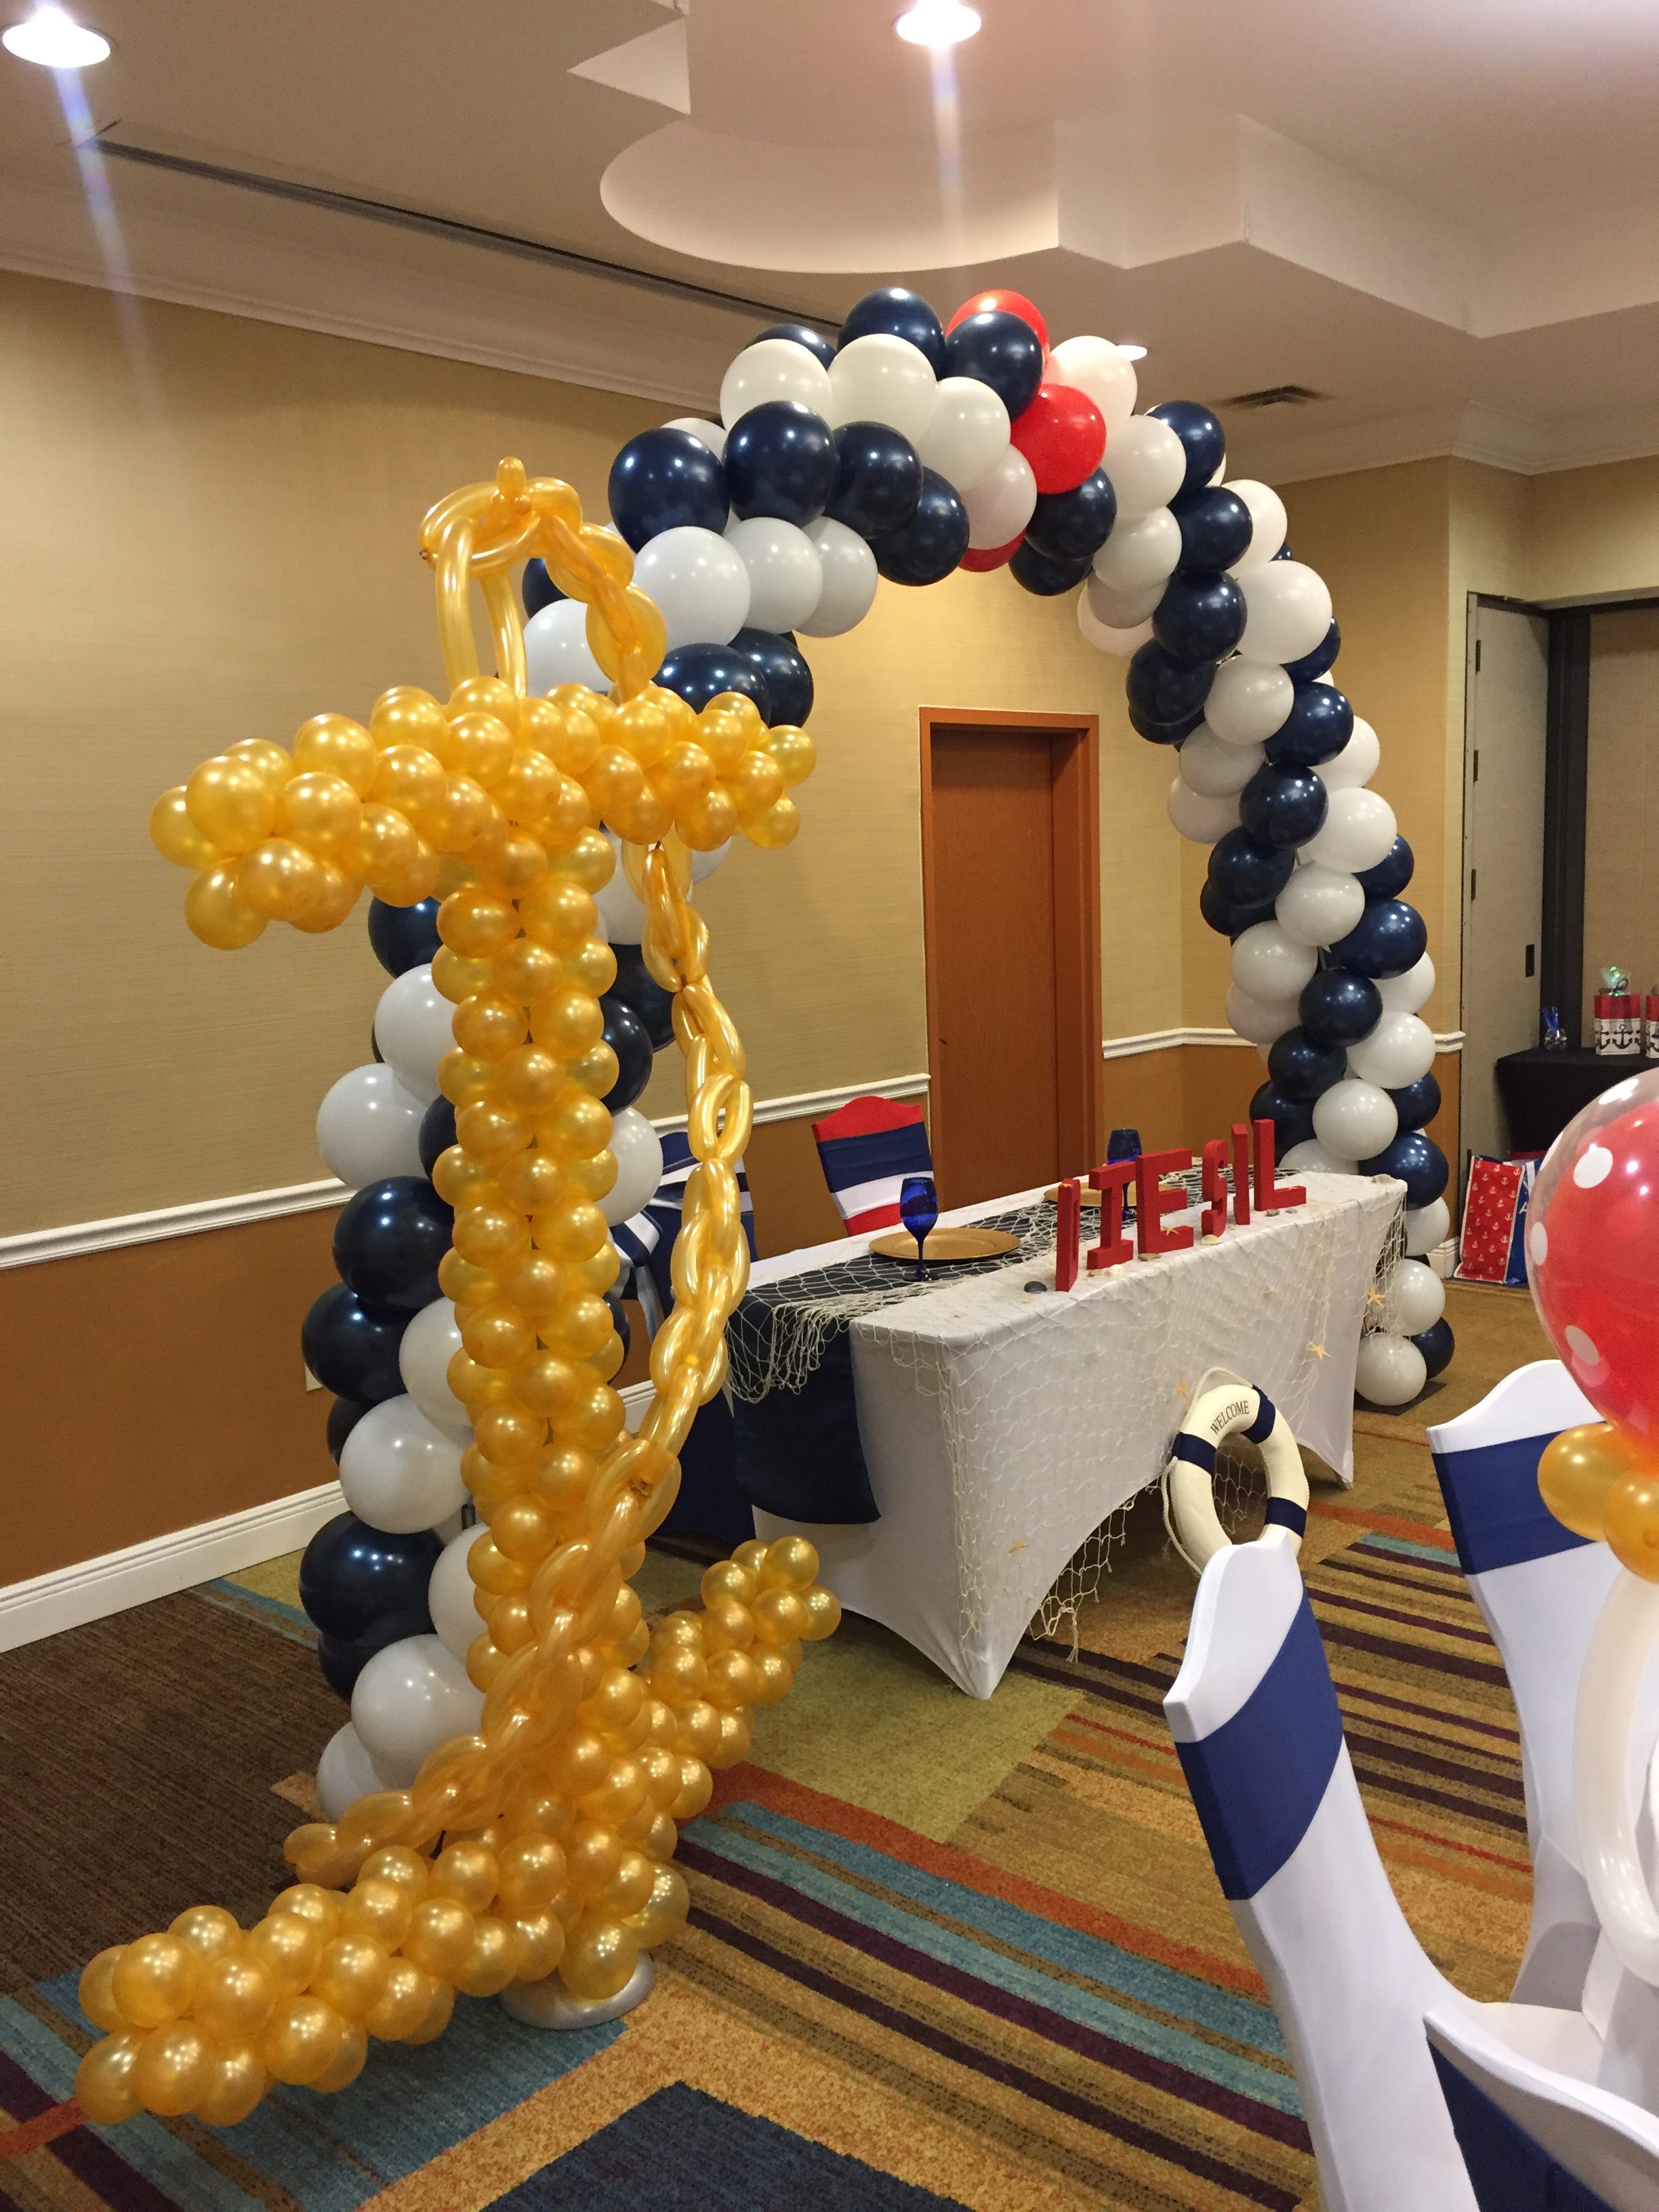 Oracle Balloon Company – We breathe life into your event, the rest